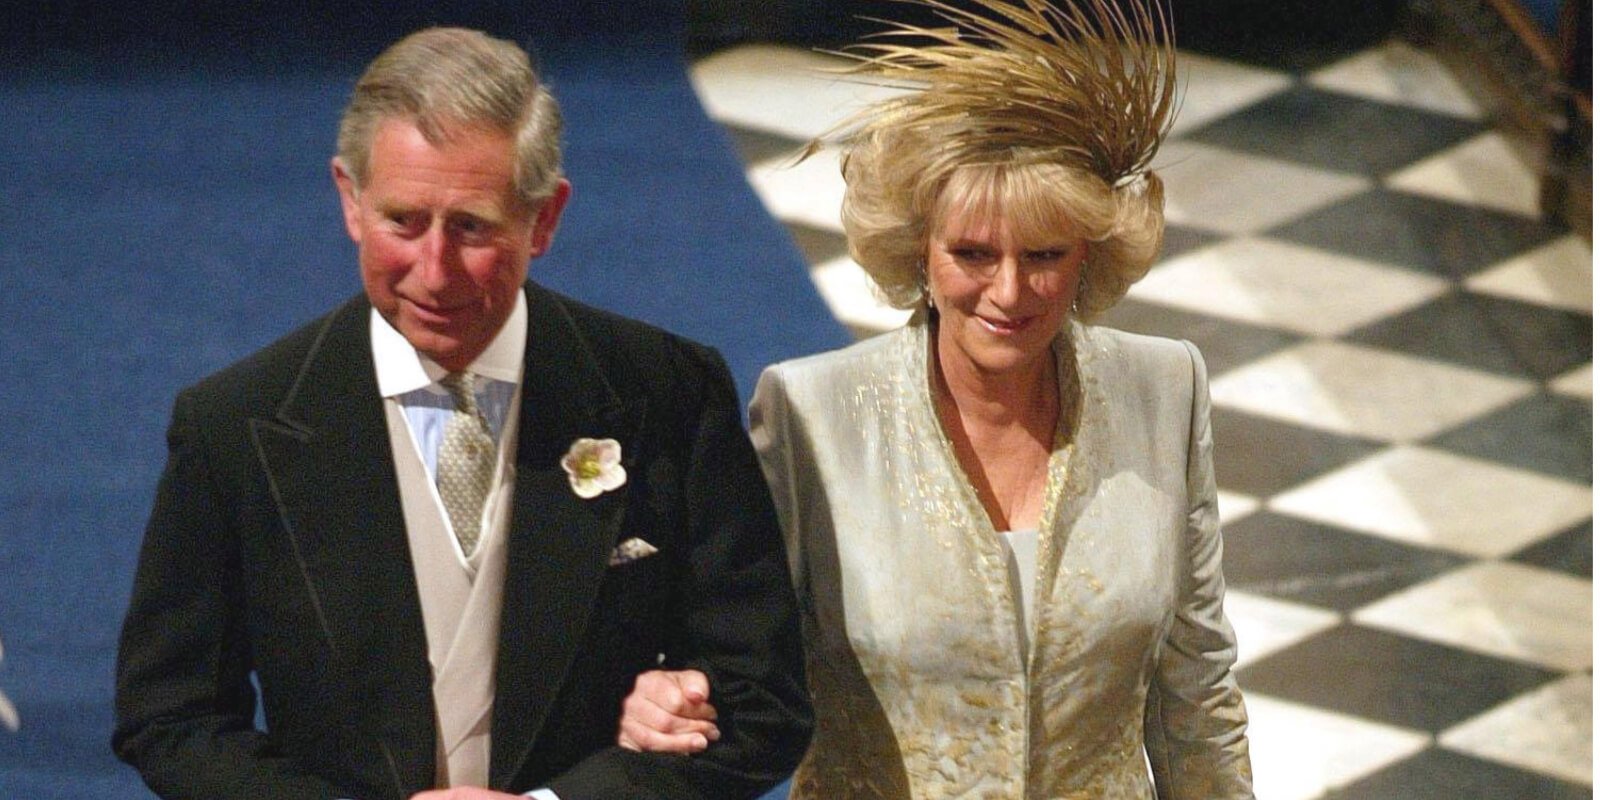 King Charles III and Camilla Parker Bowles on their wedding day in 2005.